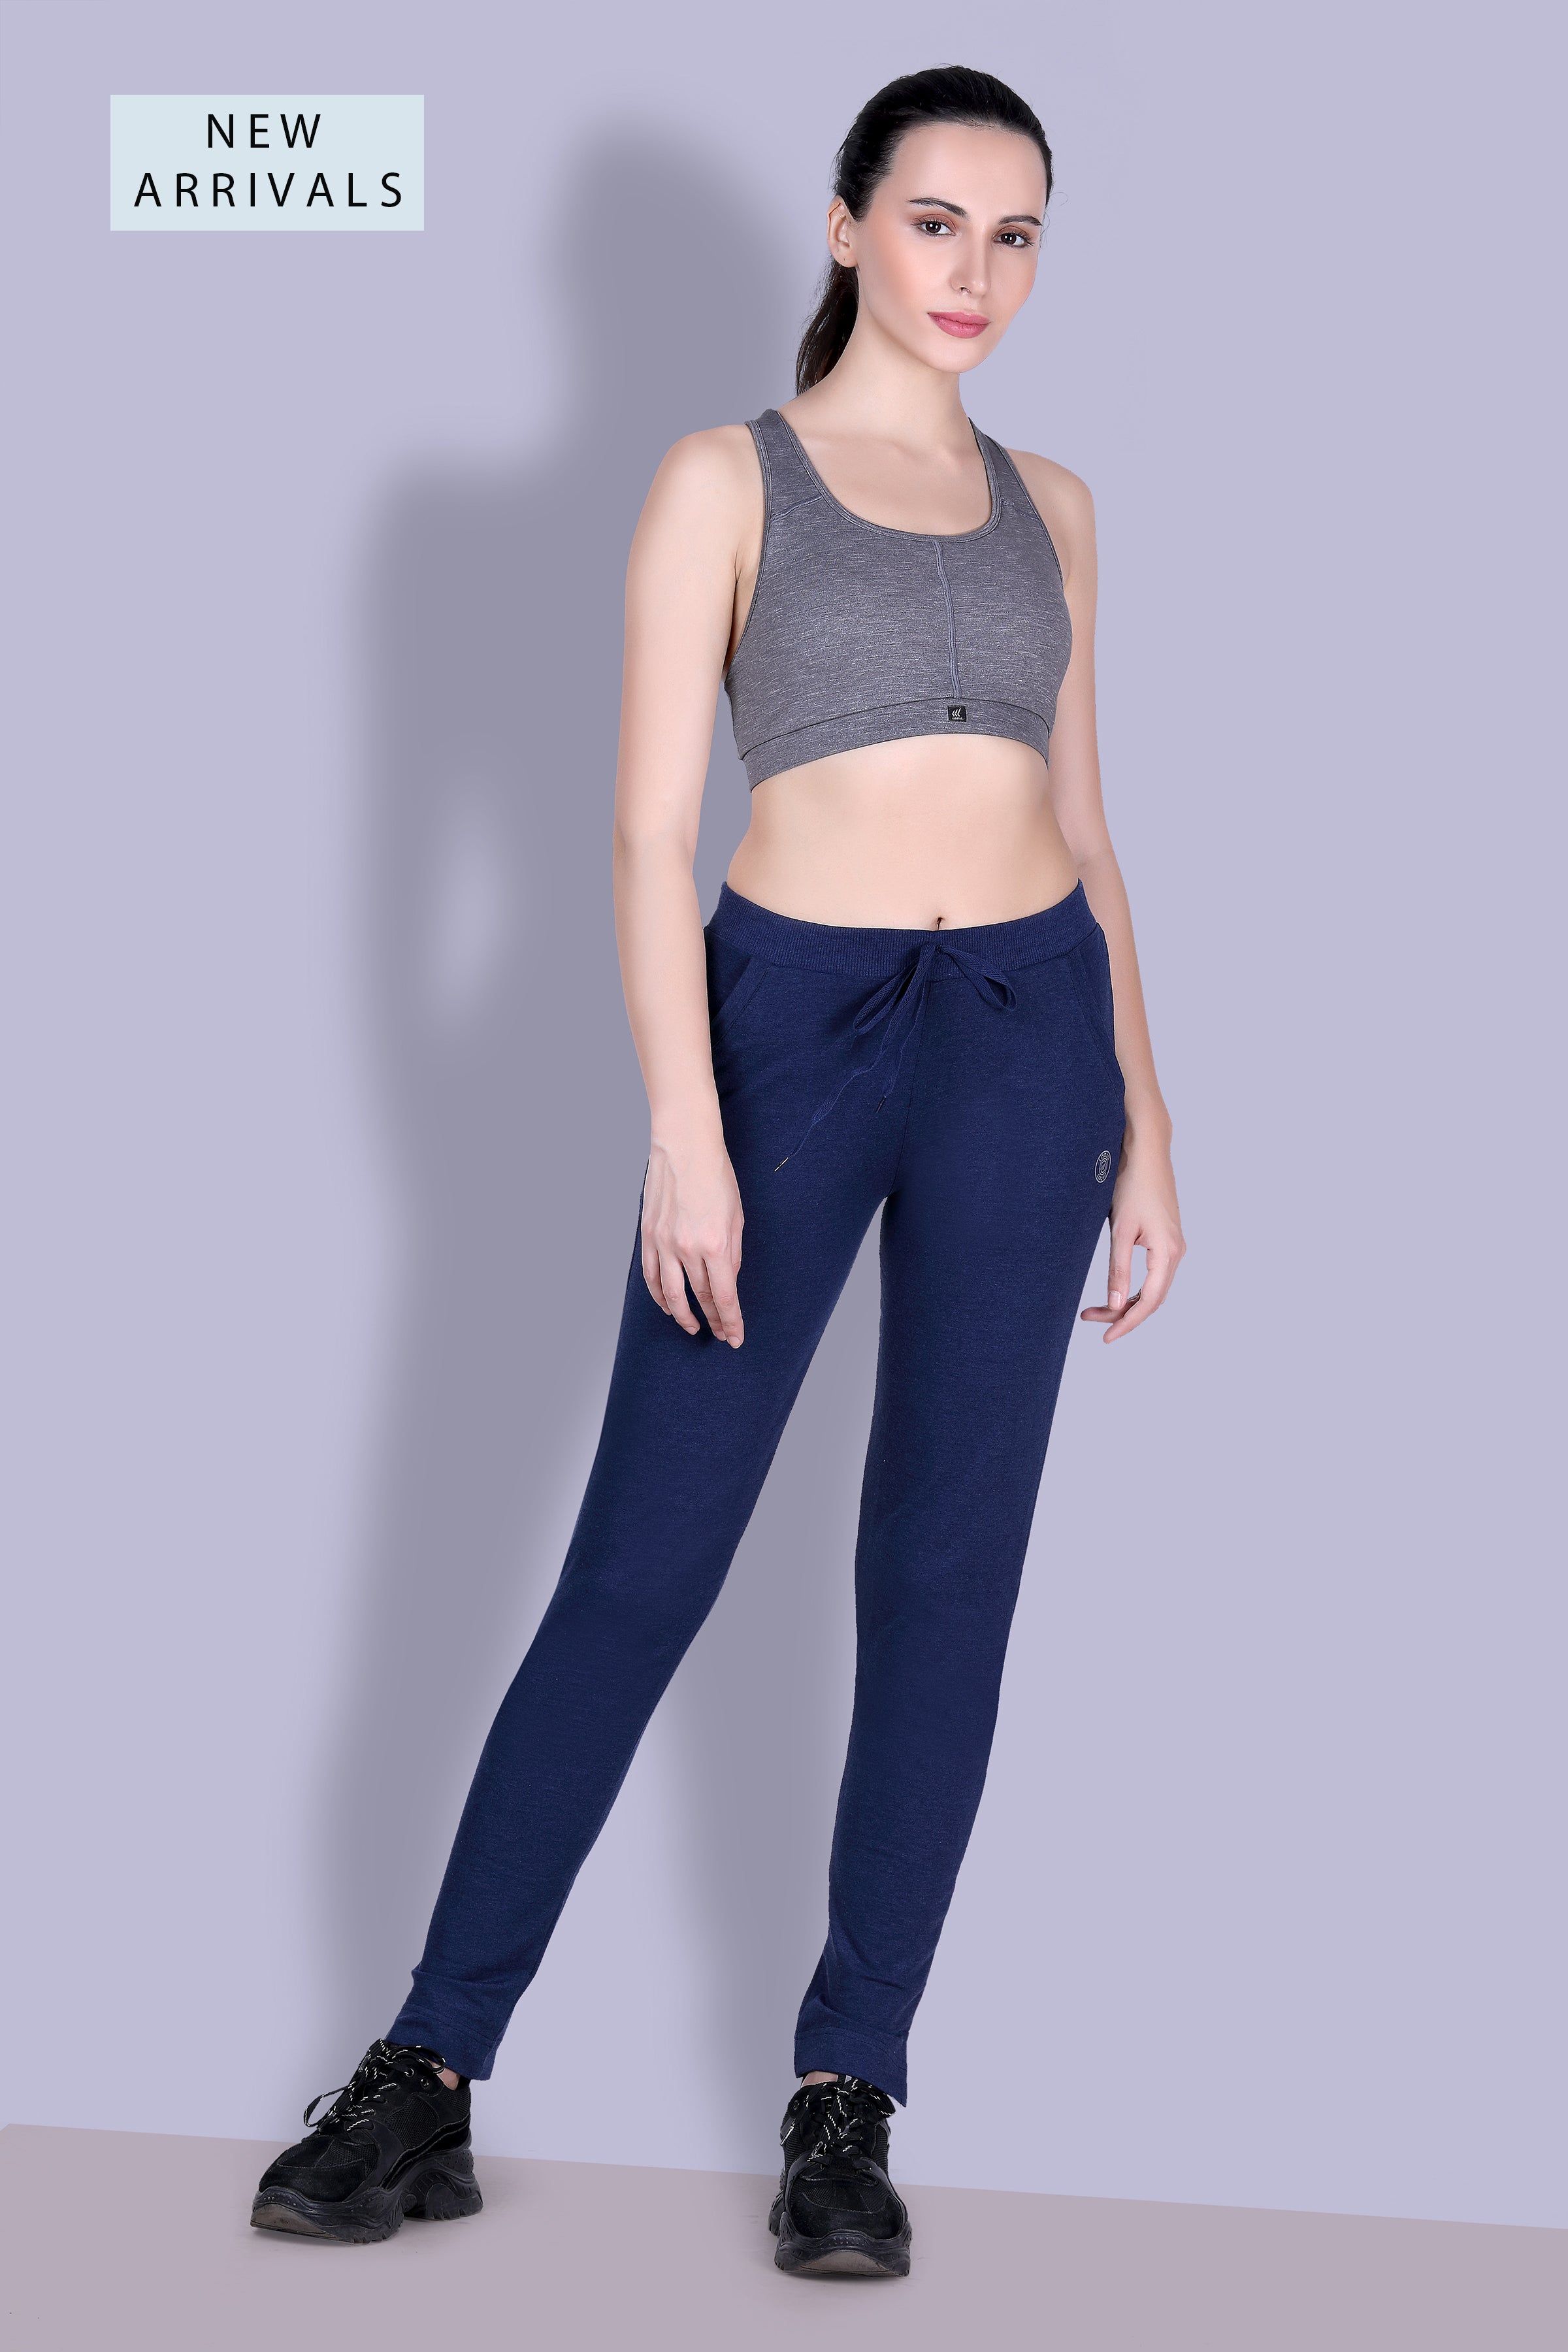 Sports Track Pants - Shop for Sports Track Pants at Best Price in India at  Myntra